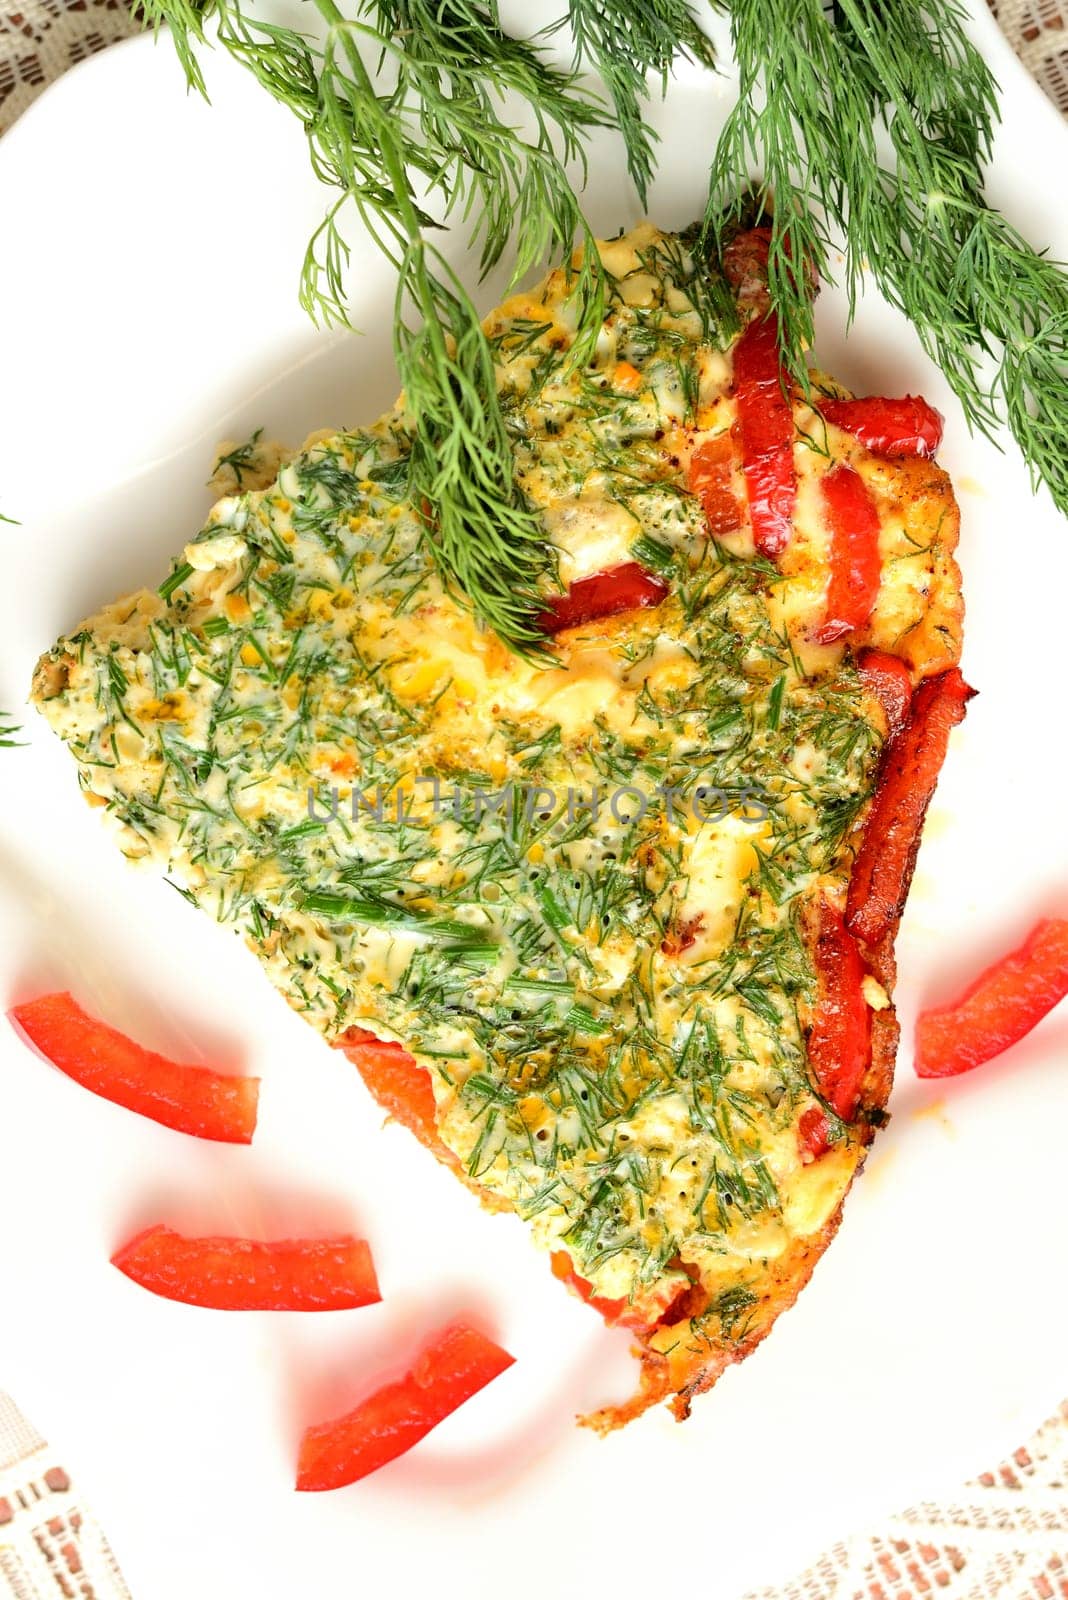 Omelette with sweet pepper and a dill by olgavolodina